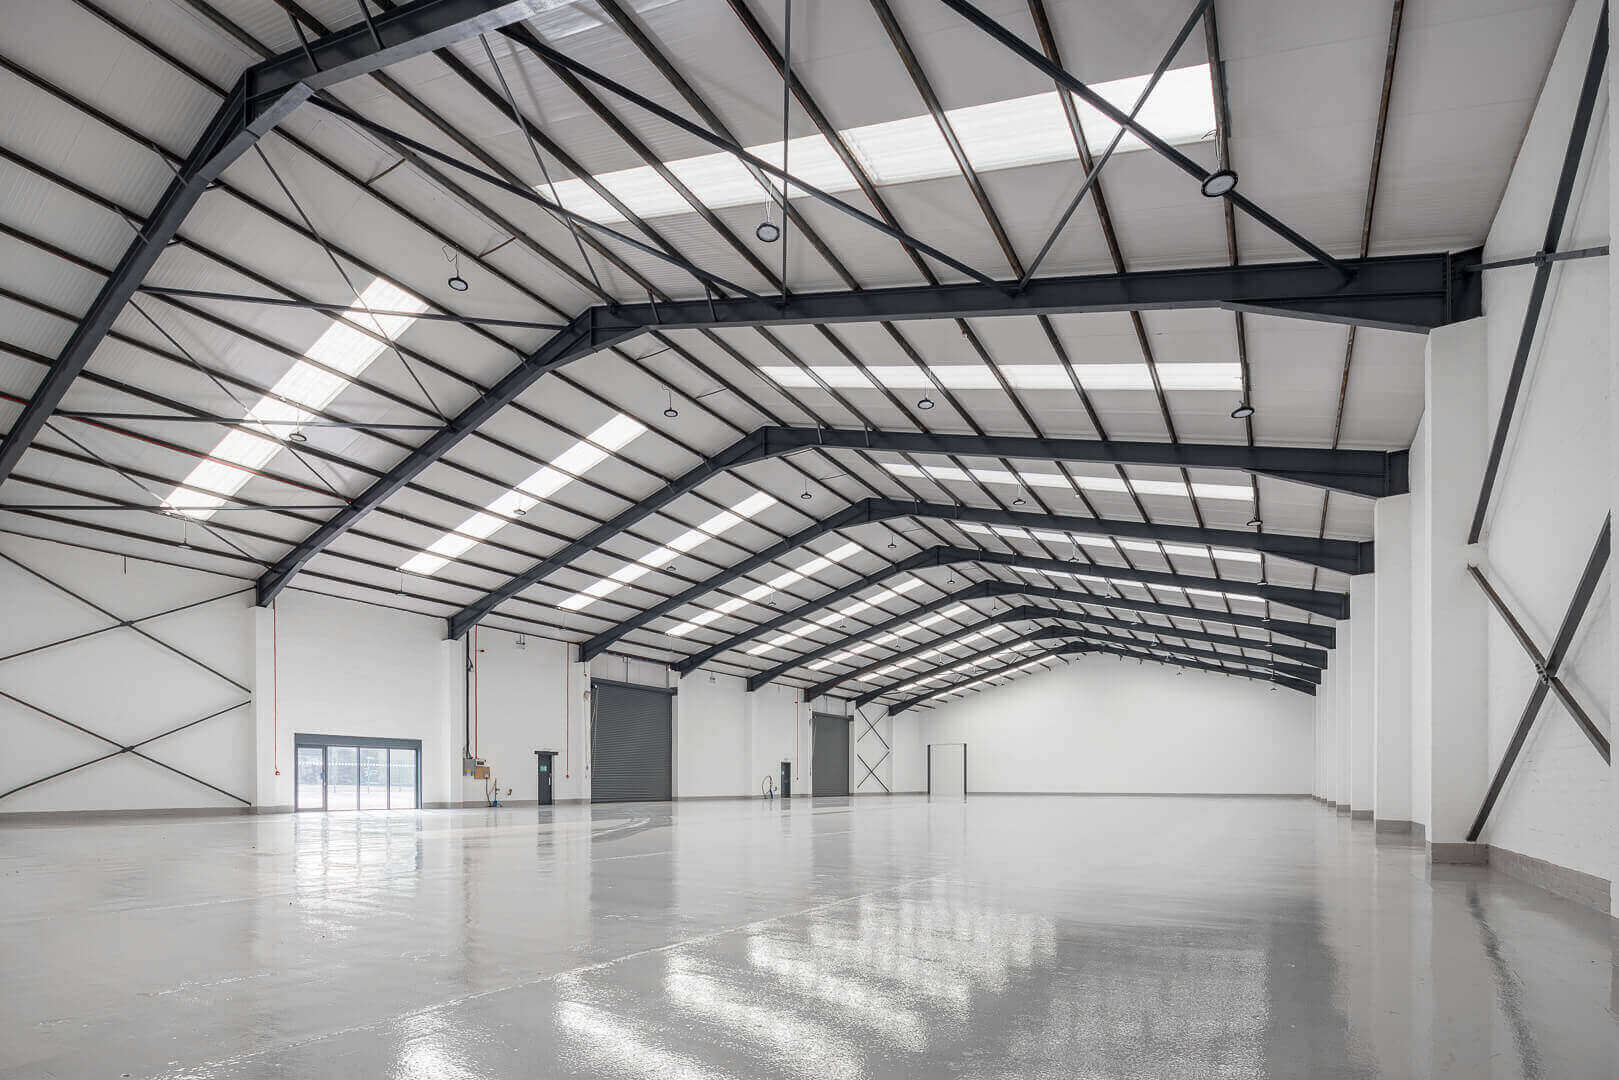 Commercial architecture and interior photography - Howley Lane Industrial Park, Warrington